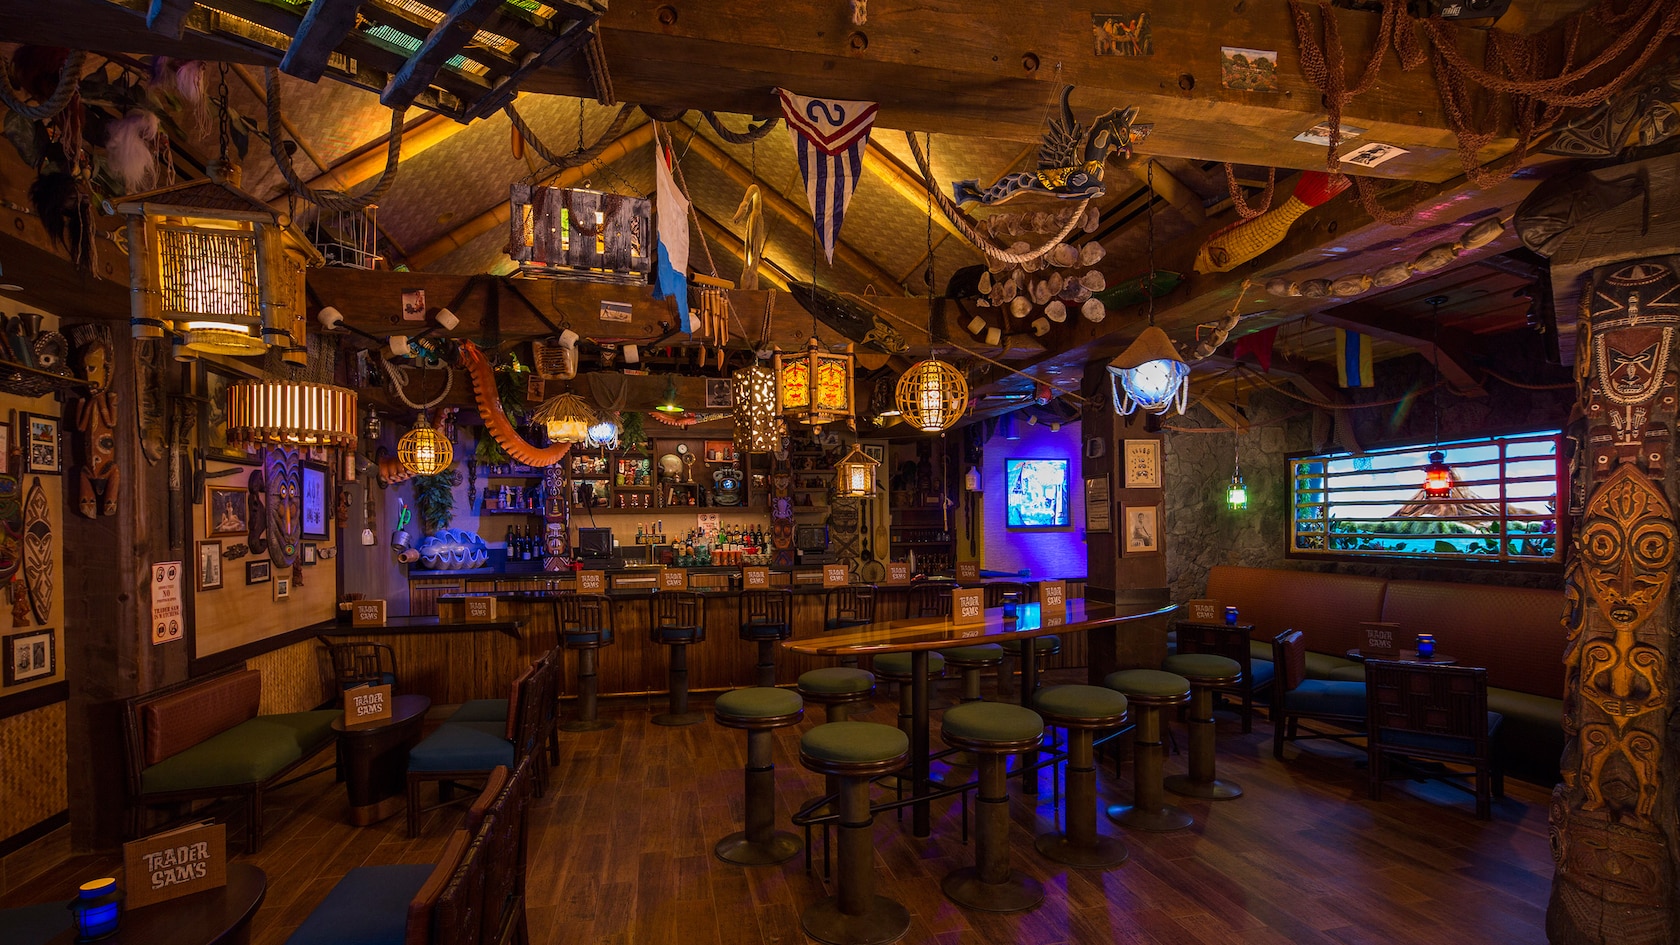 New Dole Whip Flavors Hit Trader Sam's, Matterhorn Cup Anniversary Cup Launches